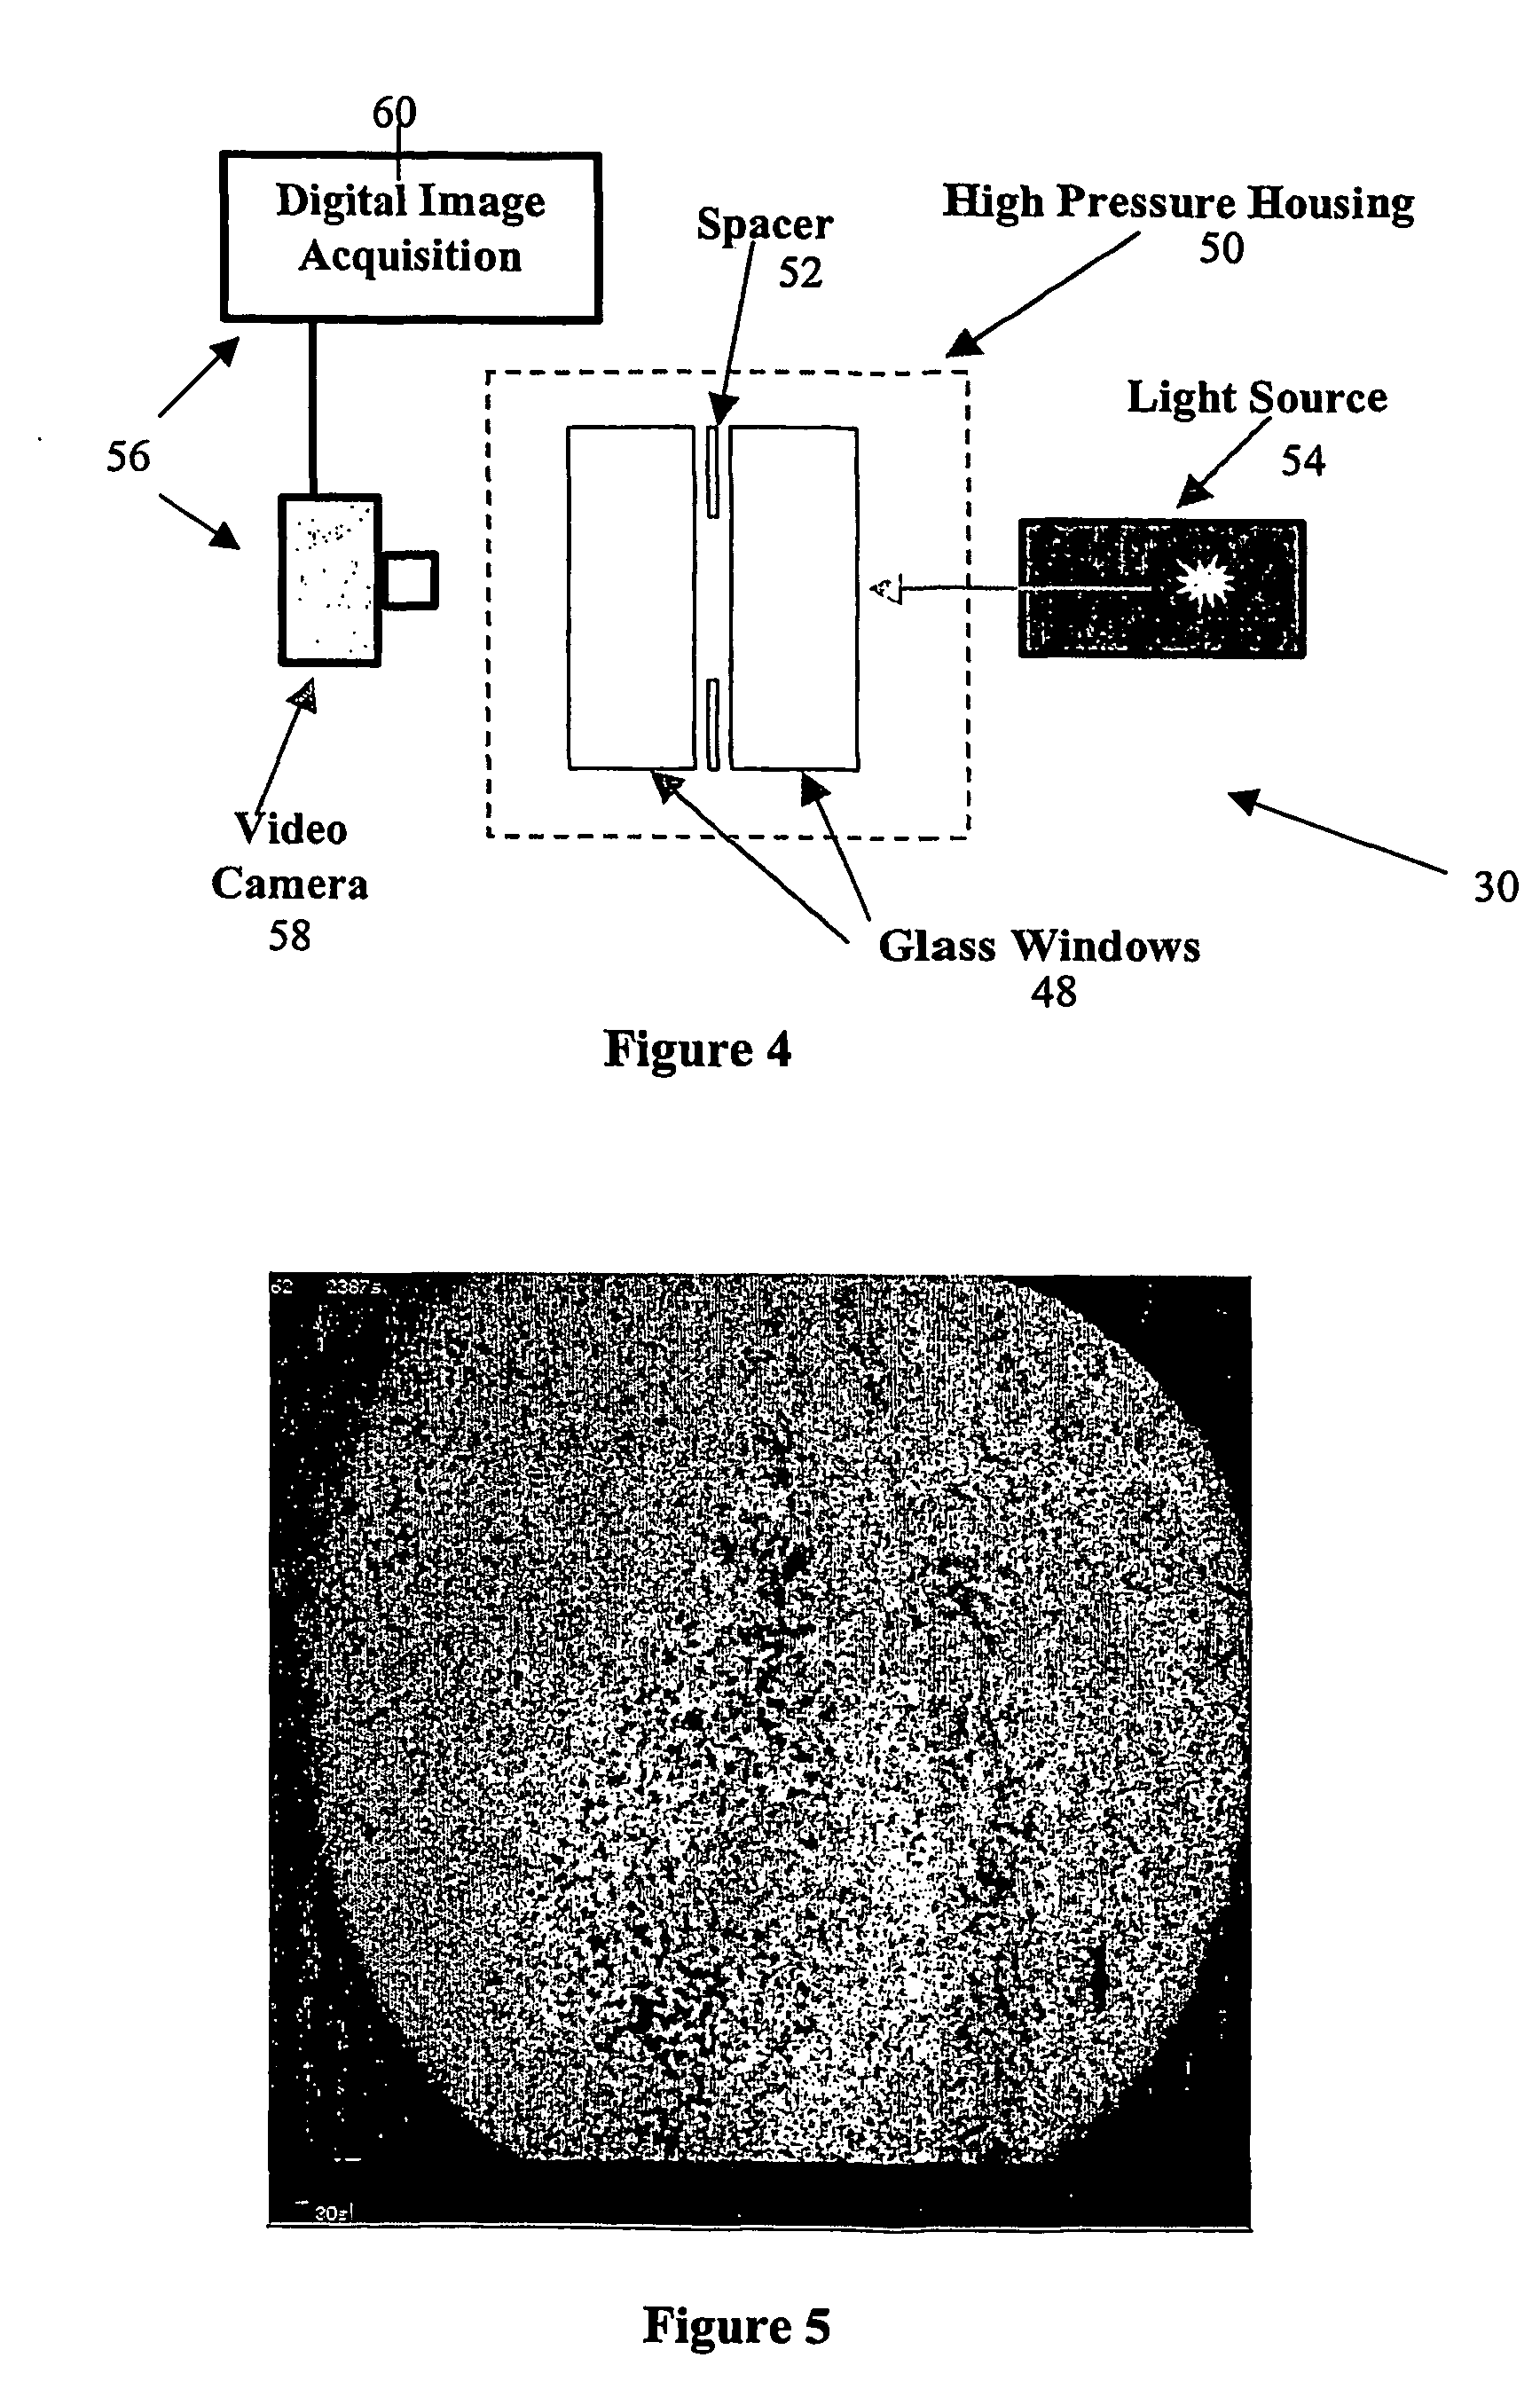 Method of characterizing a dispersion using transformation techniques